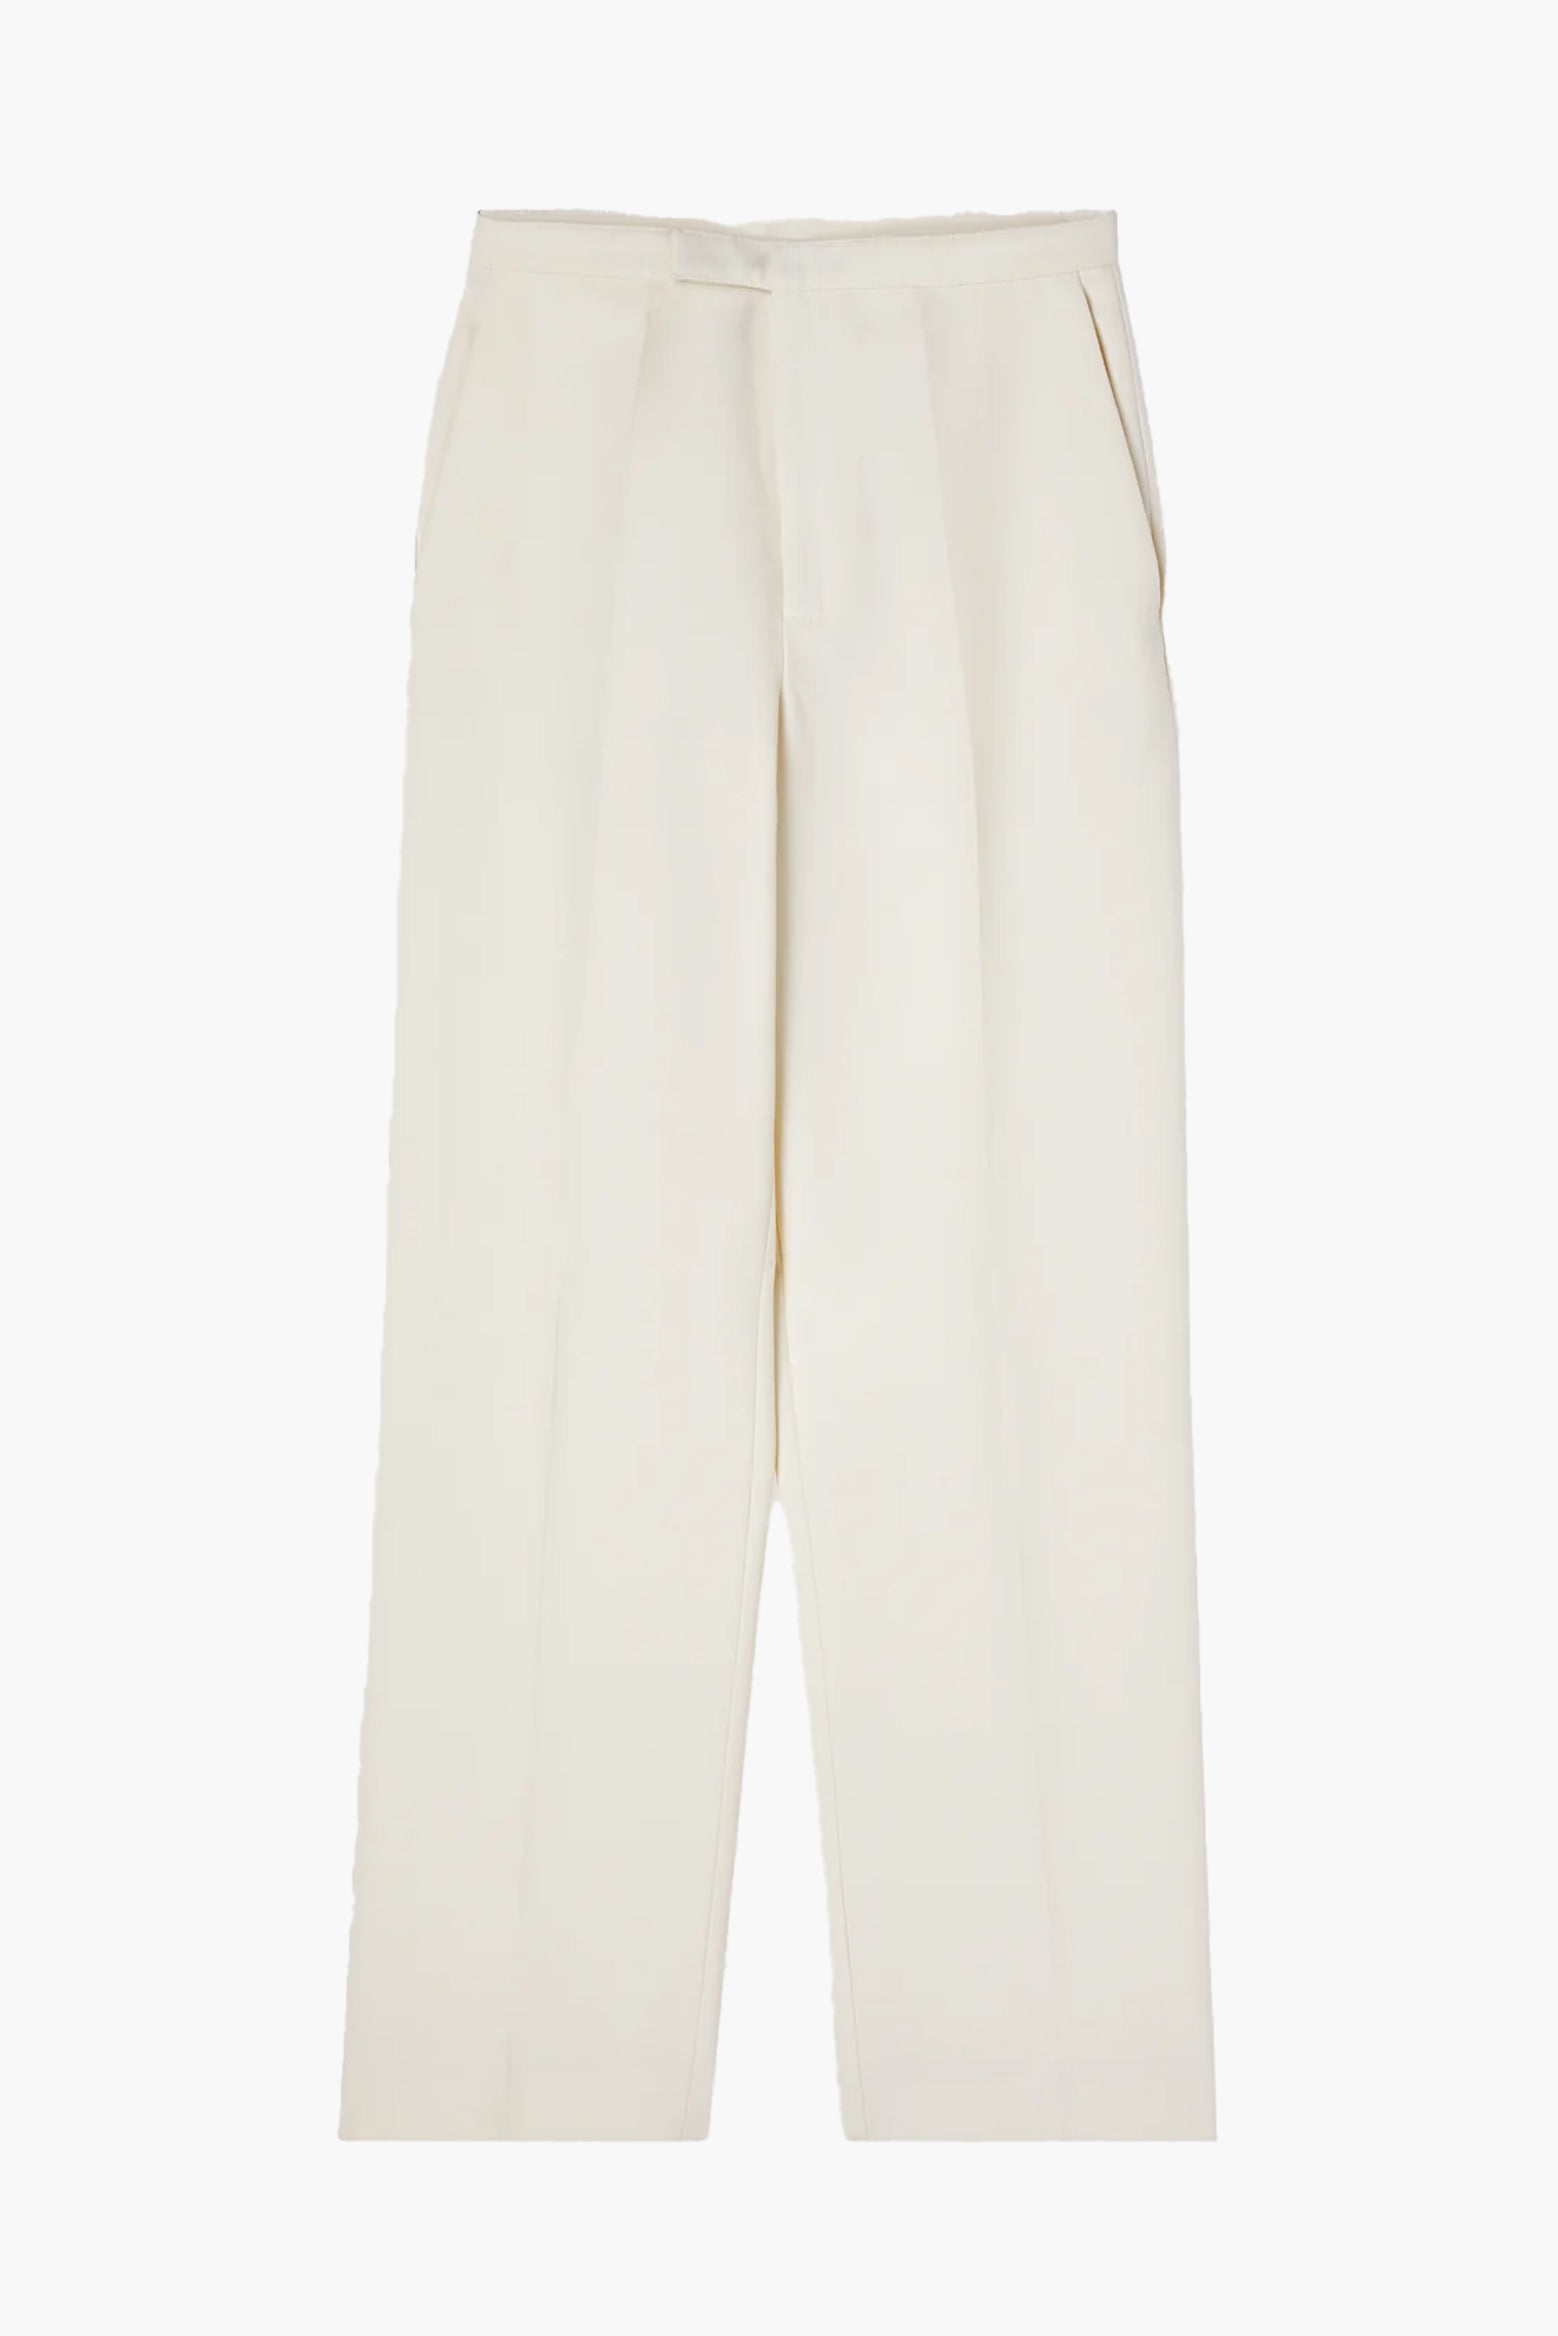 The Rohe Tailored Wool Trousers in Ivory available at The New Trend Australia